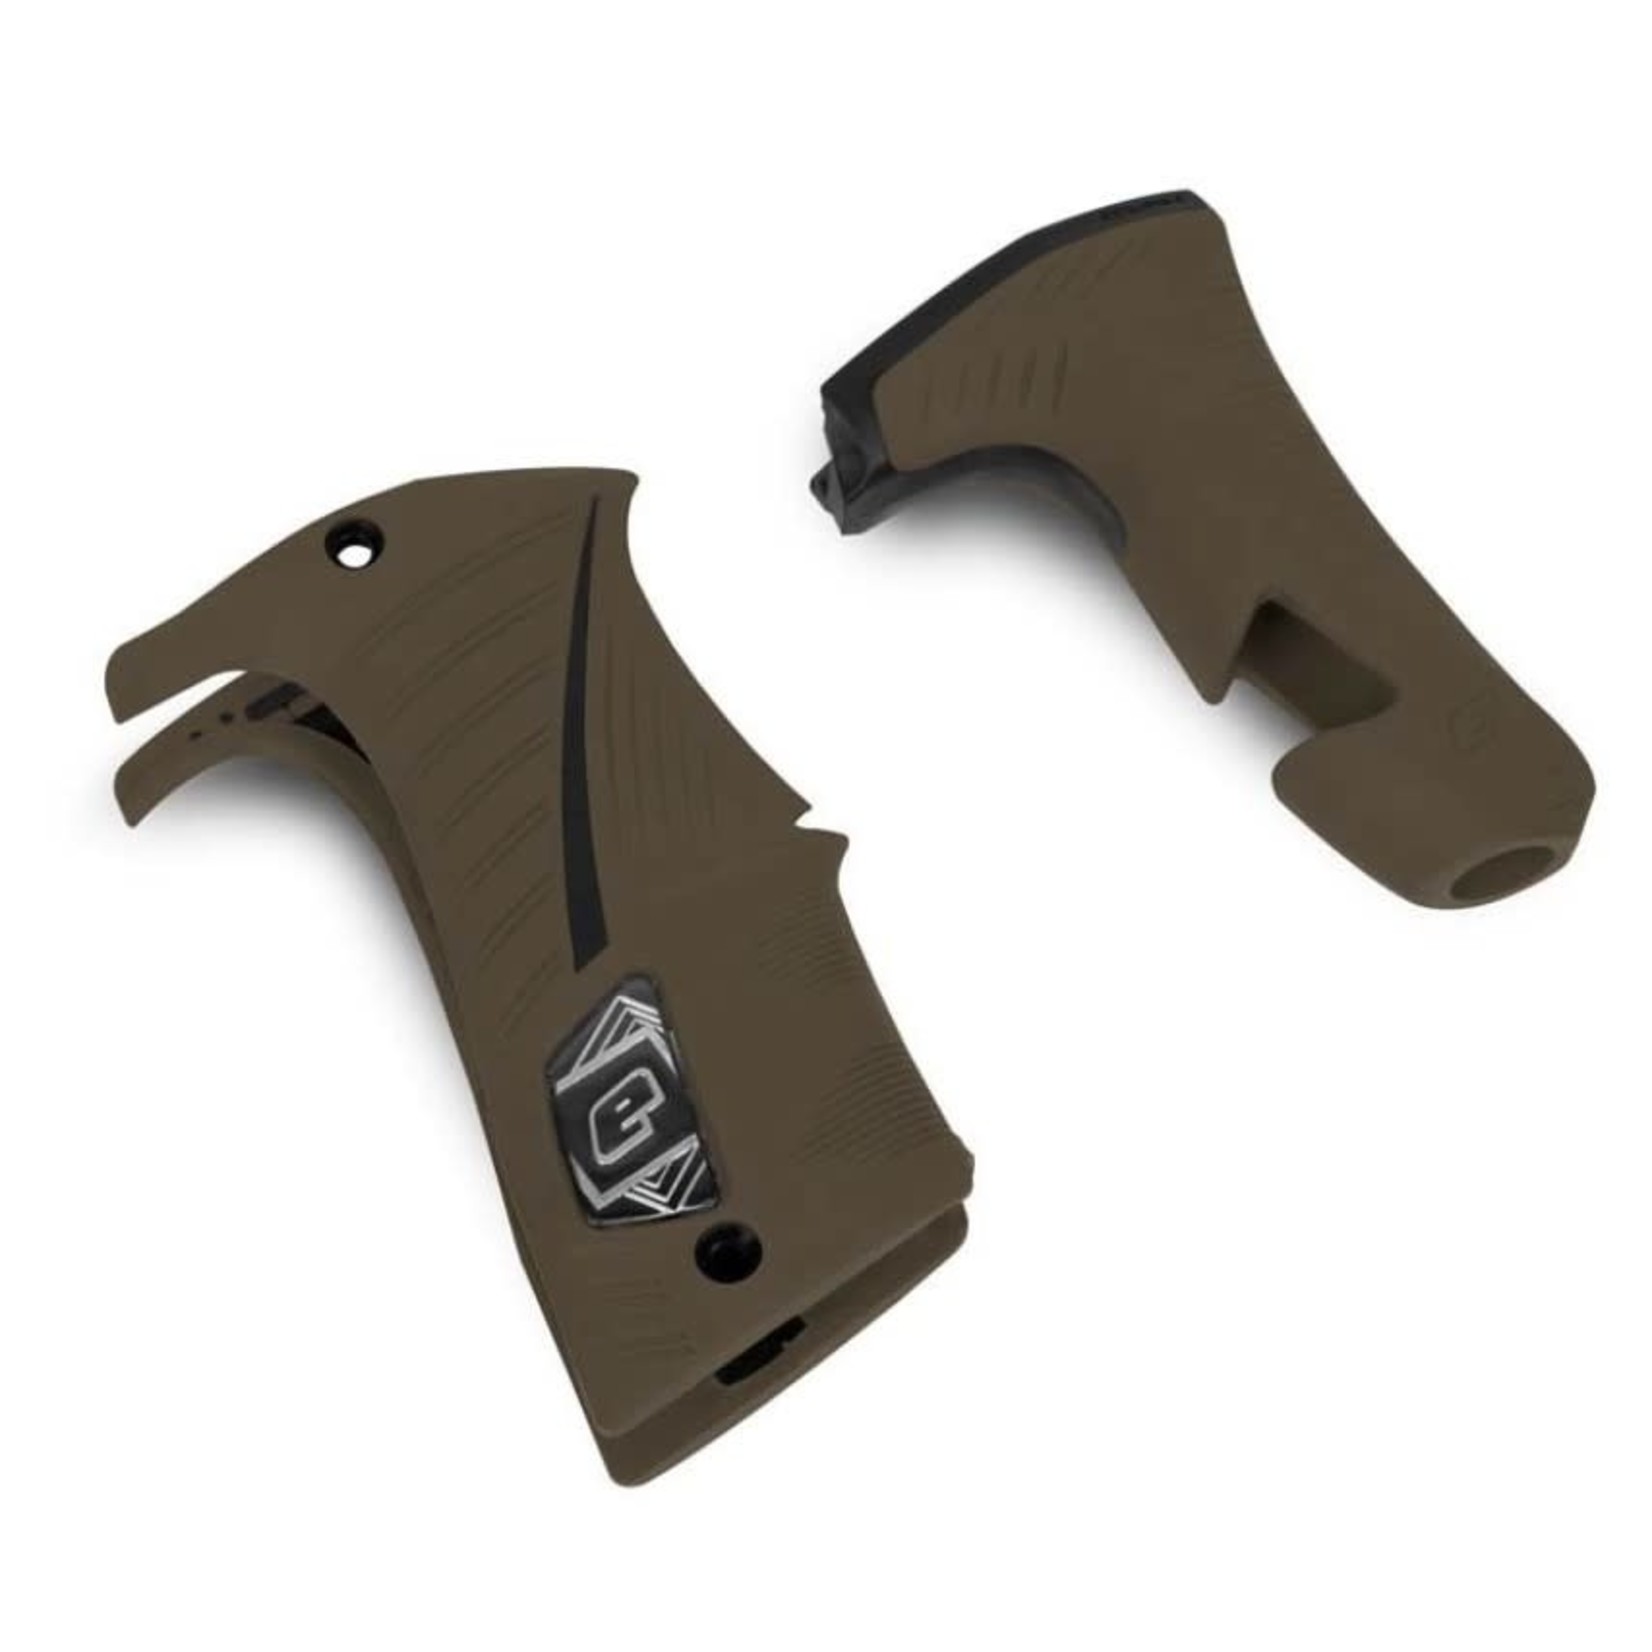 Planet Eclipse LV Grips - Earth